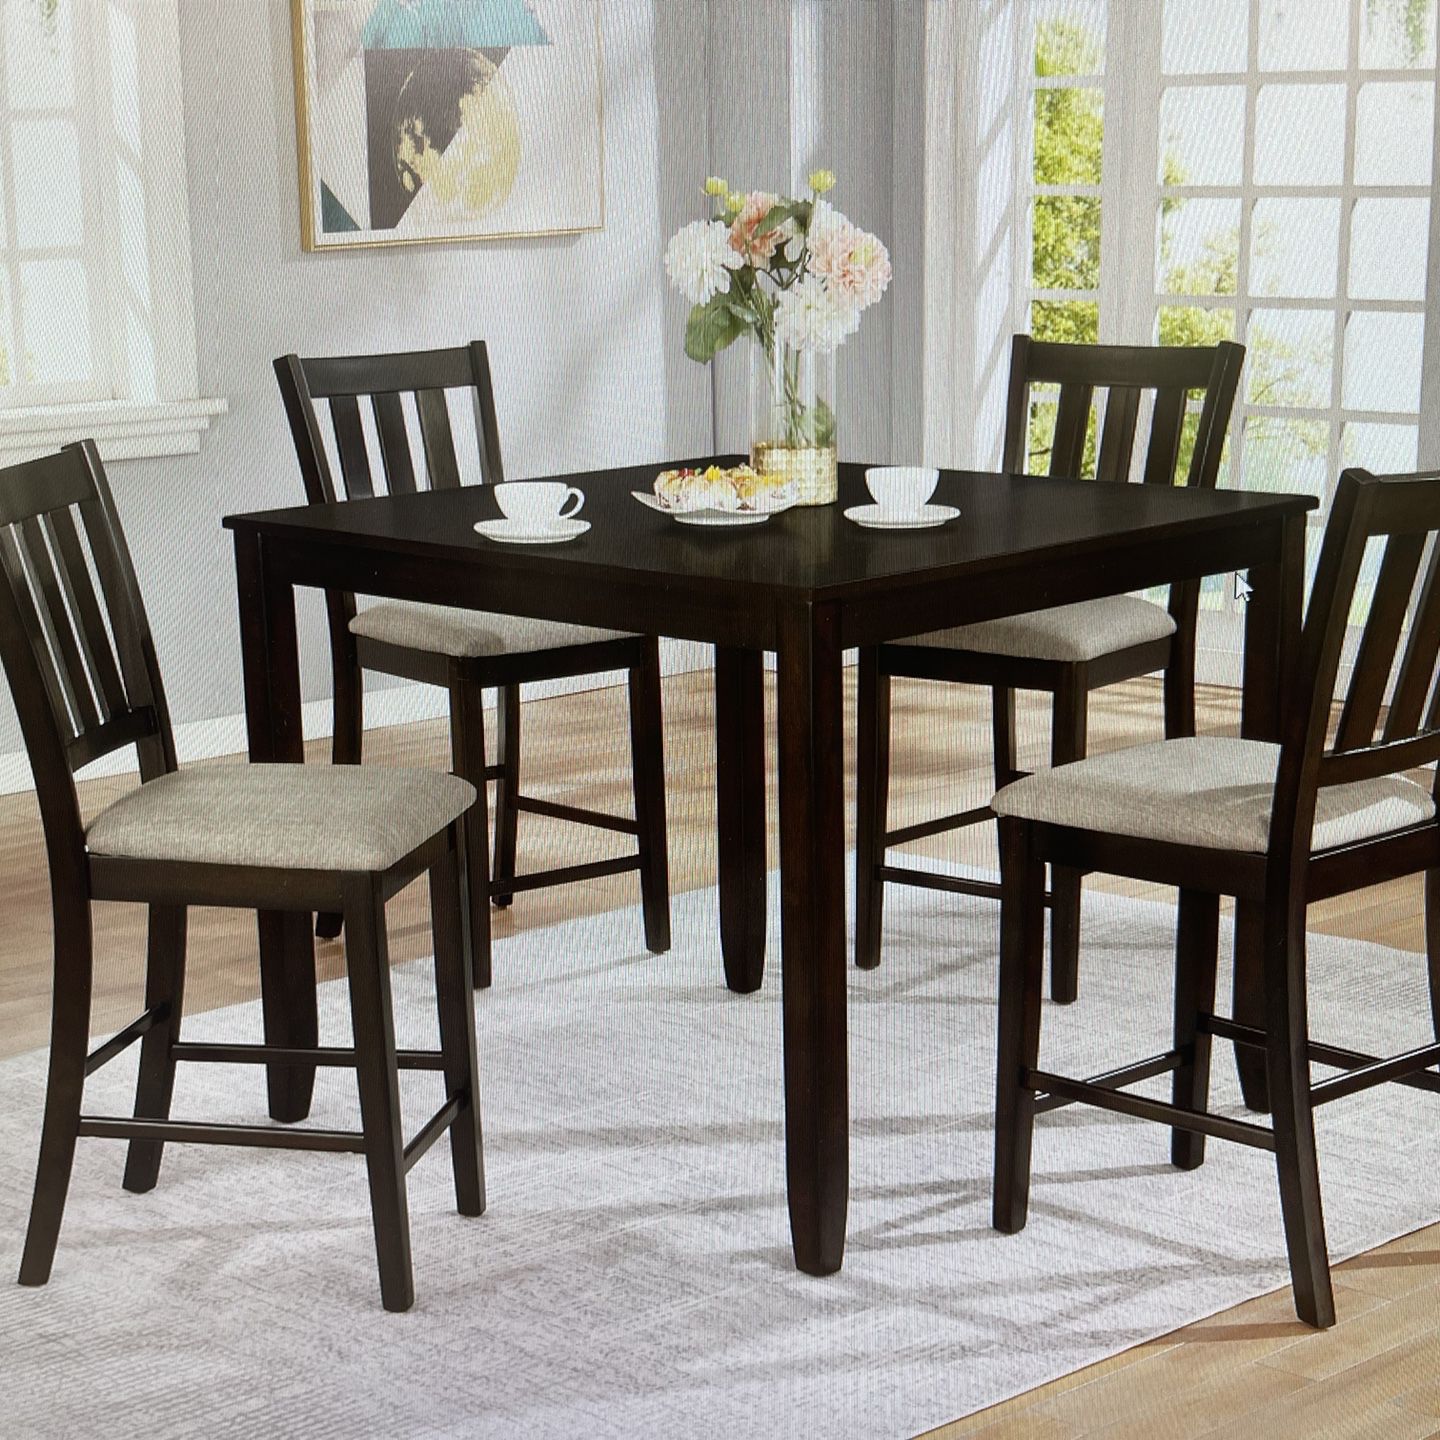 New Table With 4 Chairs For $289